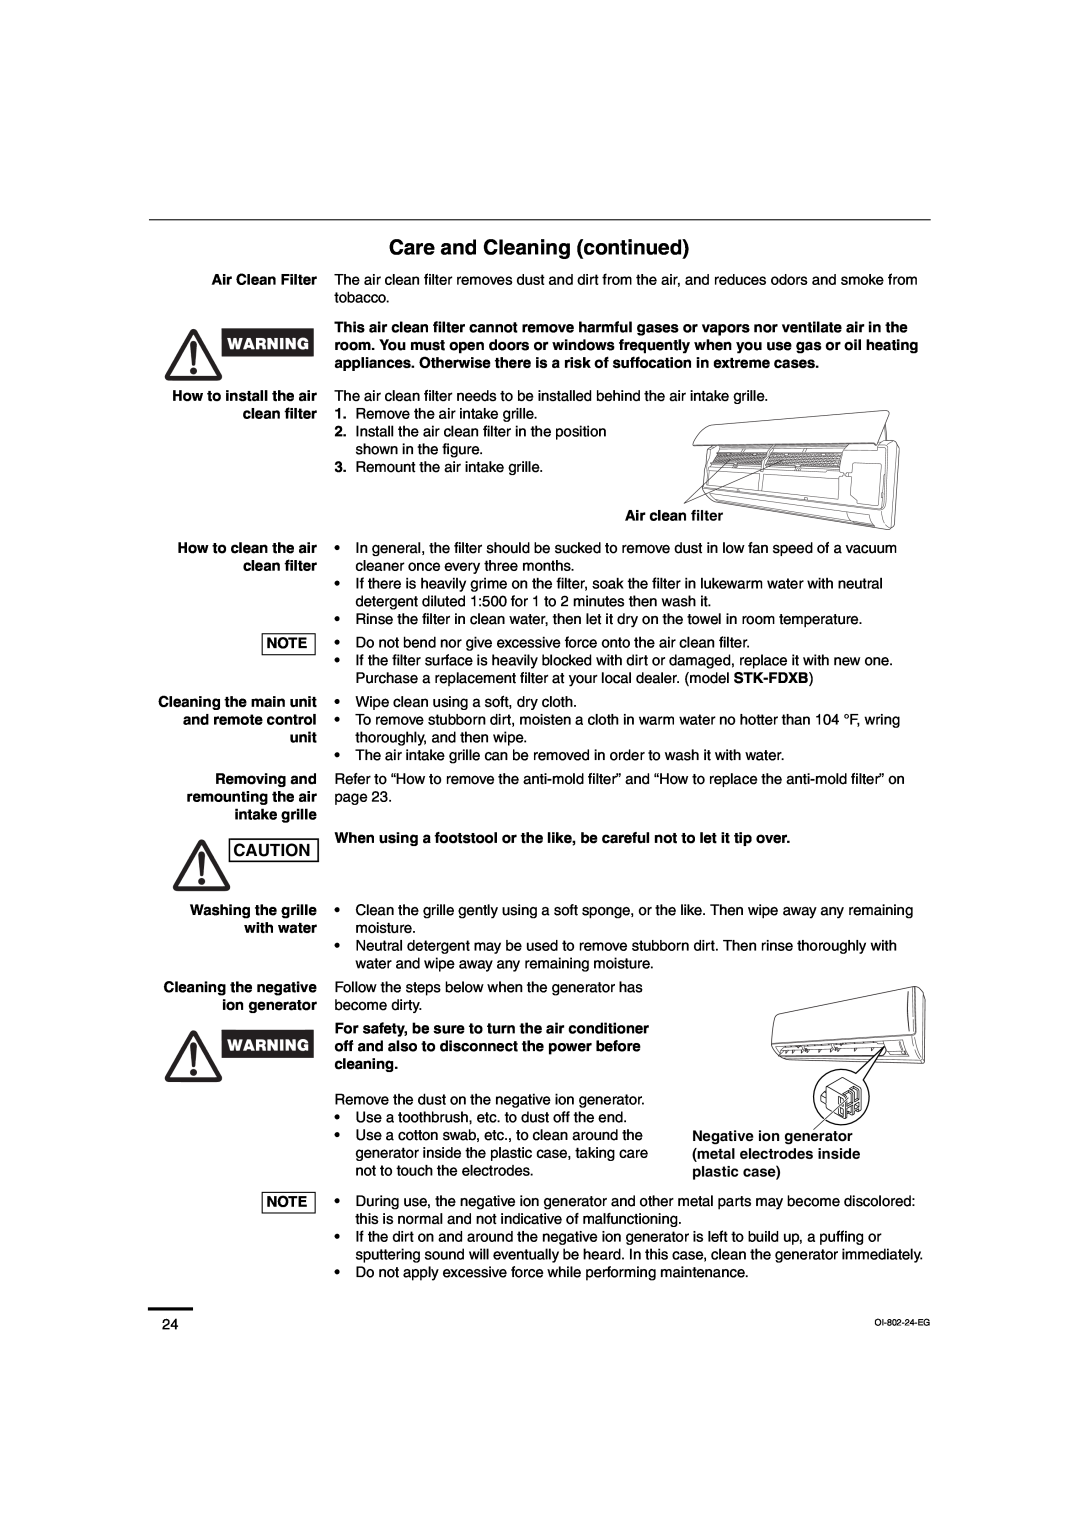 Sanyo CH0971, CH1271 service manual Care and Cleaning continued, Air Clean Filter 